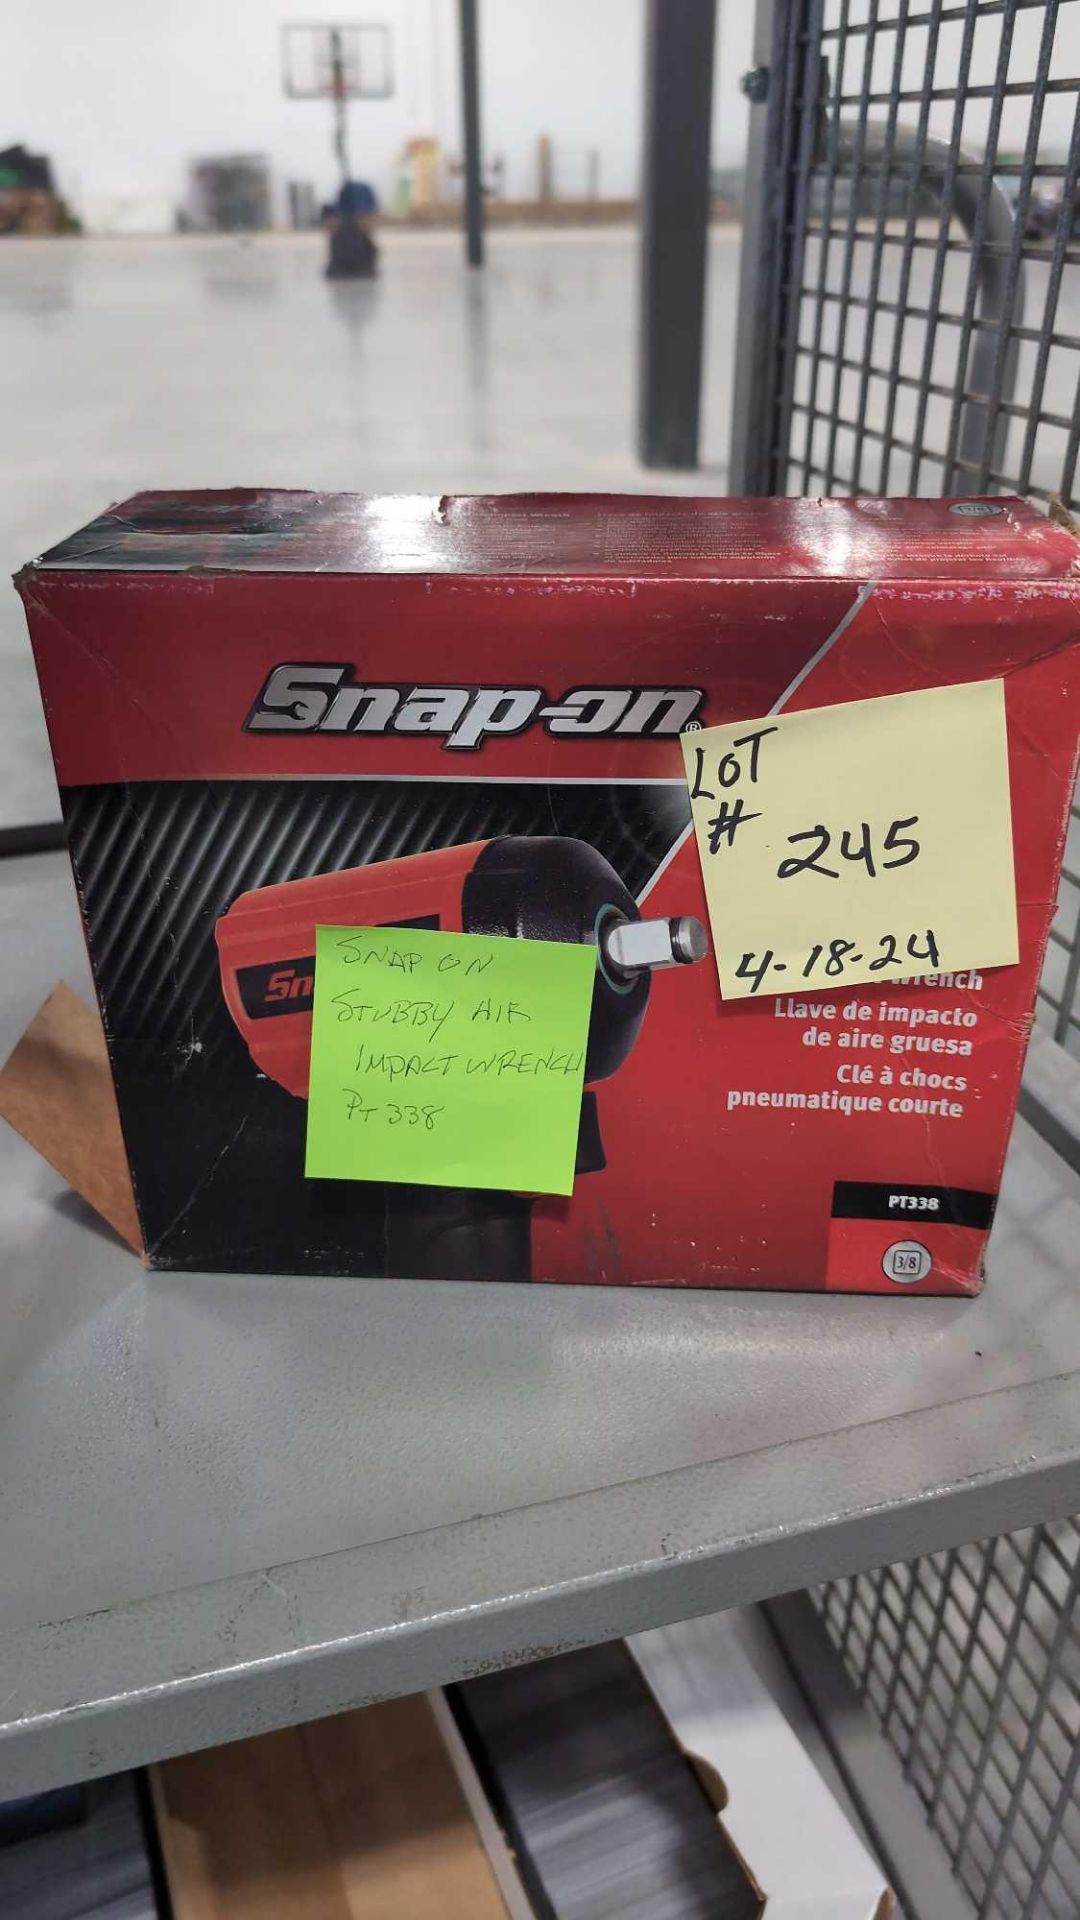 Snap on stubby air impact wrench - Image 2 of 2